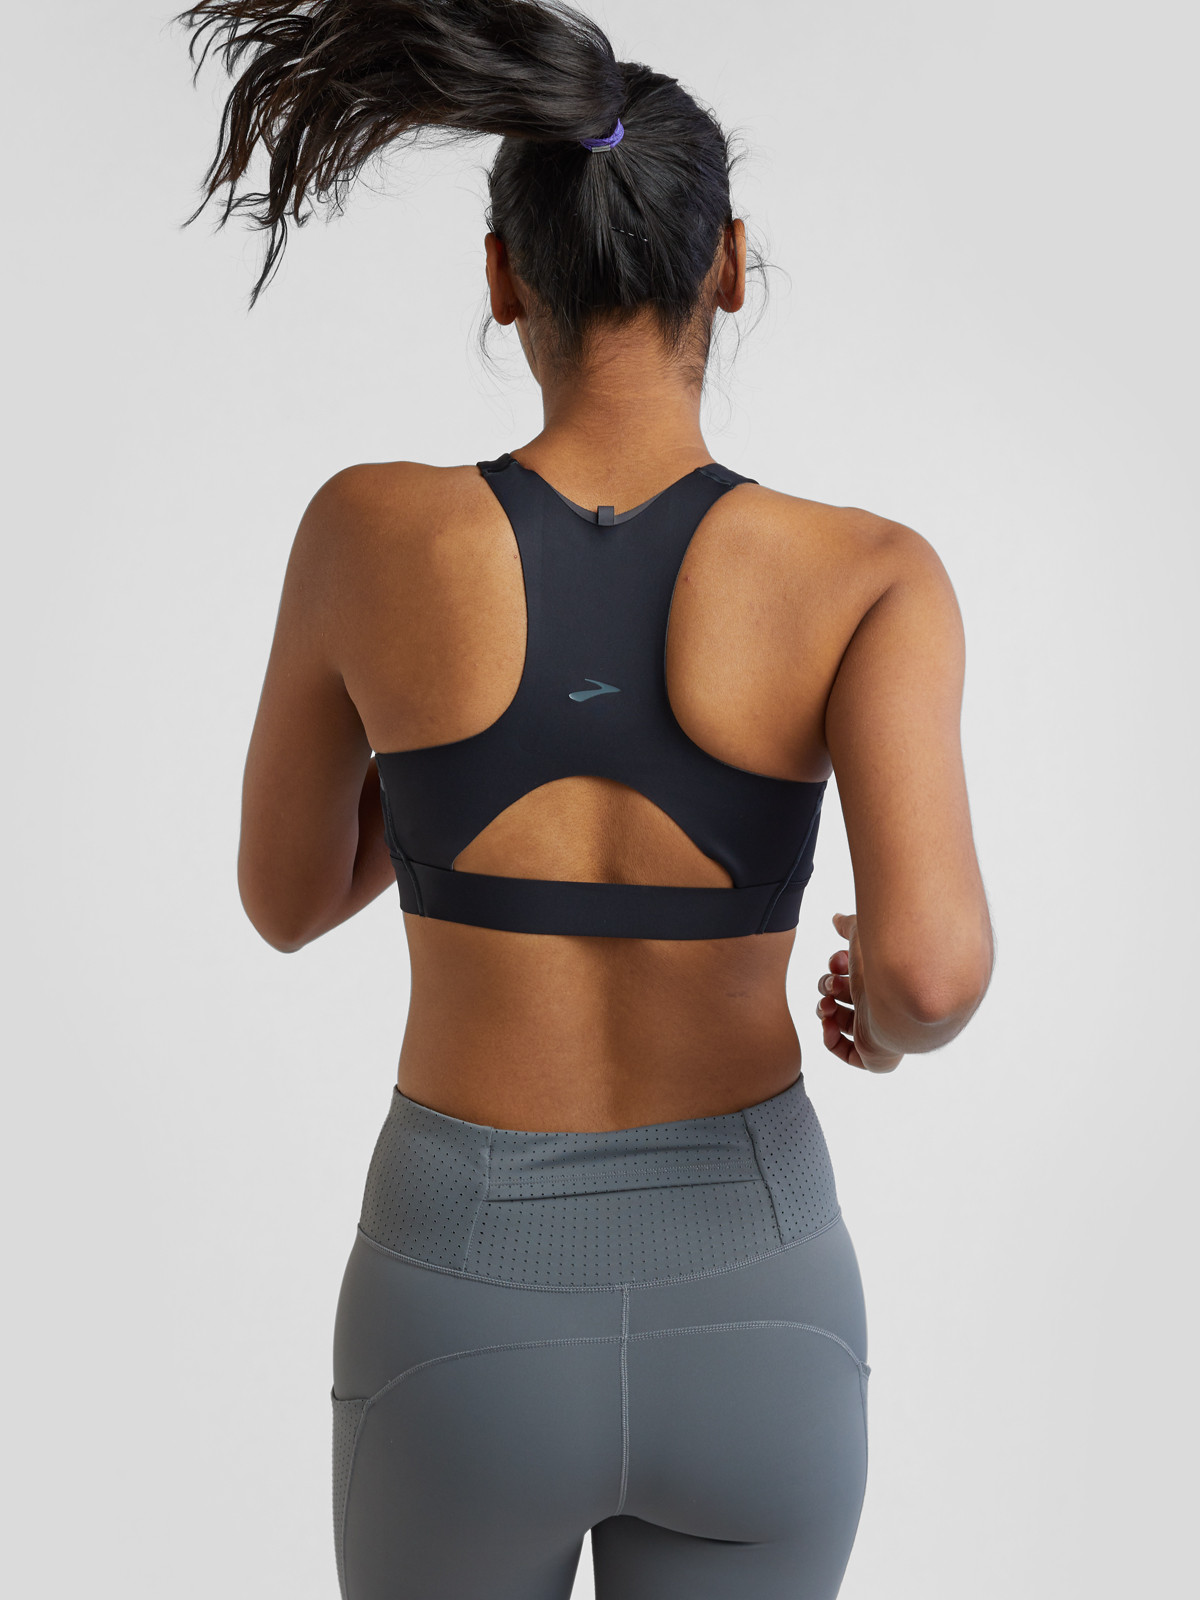 This sports bra @lole is just $19.99 for a 2-pack! It's a high